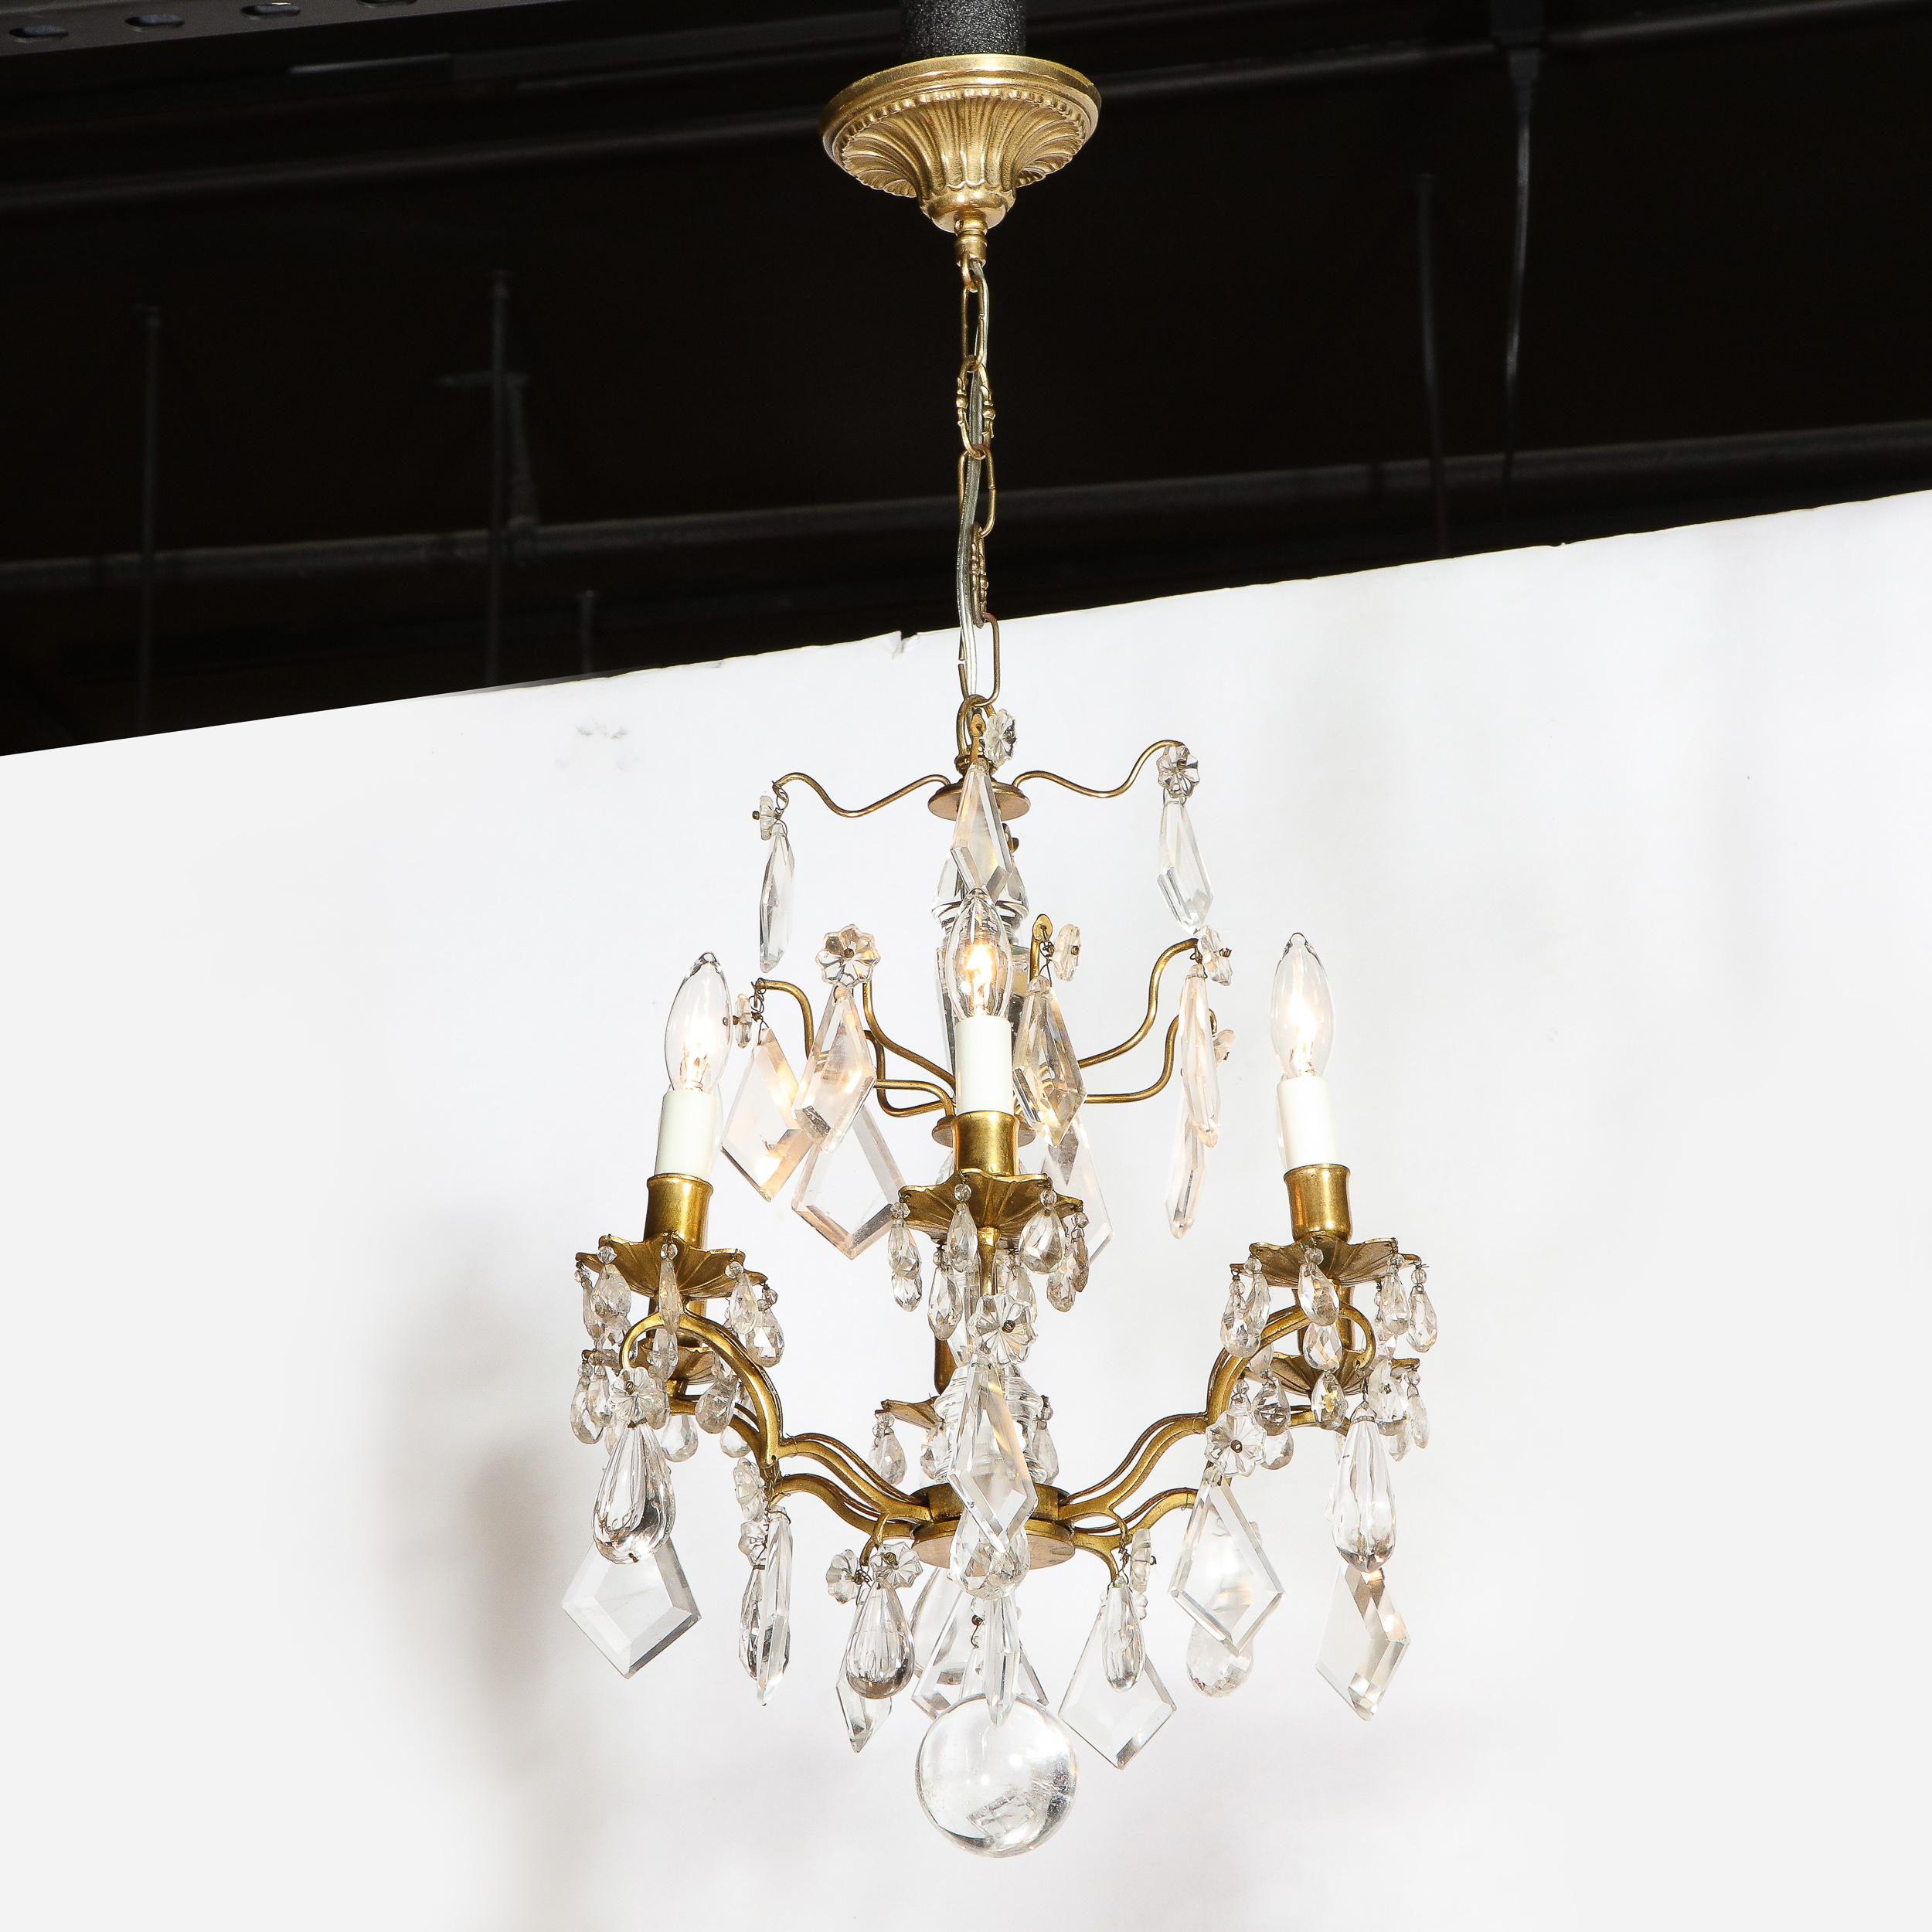 French Early 19th Century Rock Crystal & Gilded Bronze Louis XV Style Chandelier 3